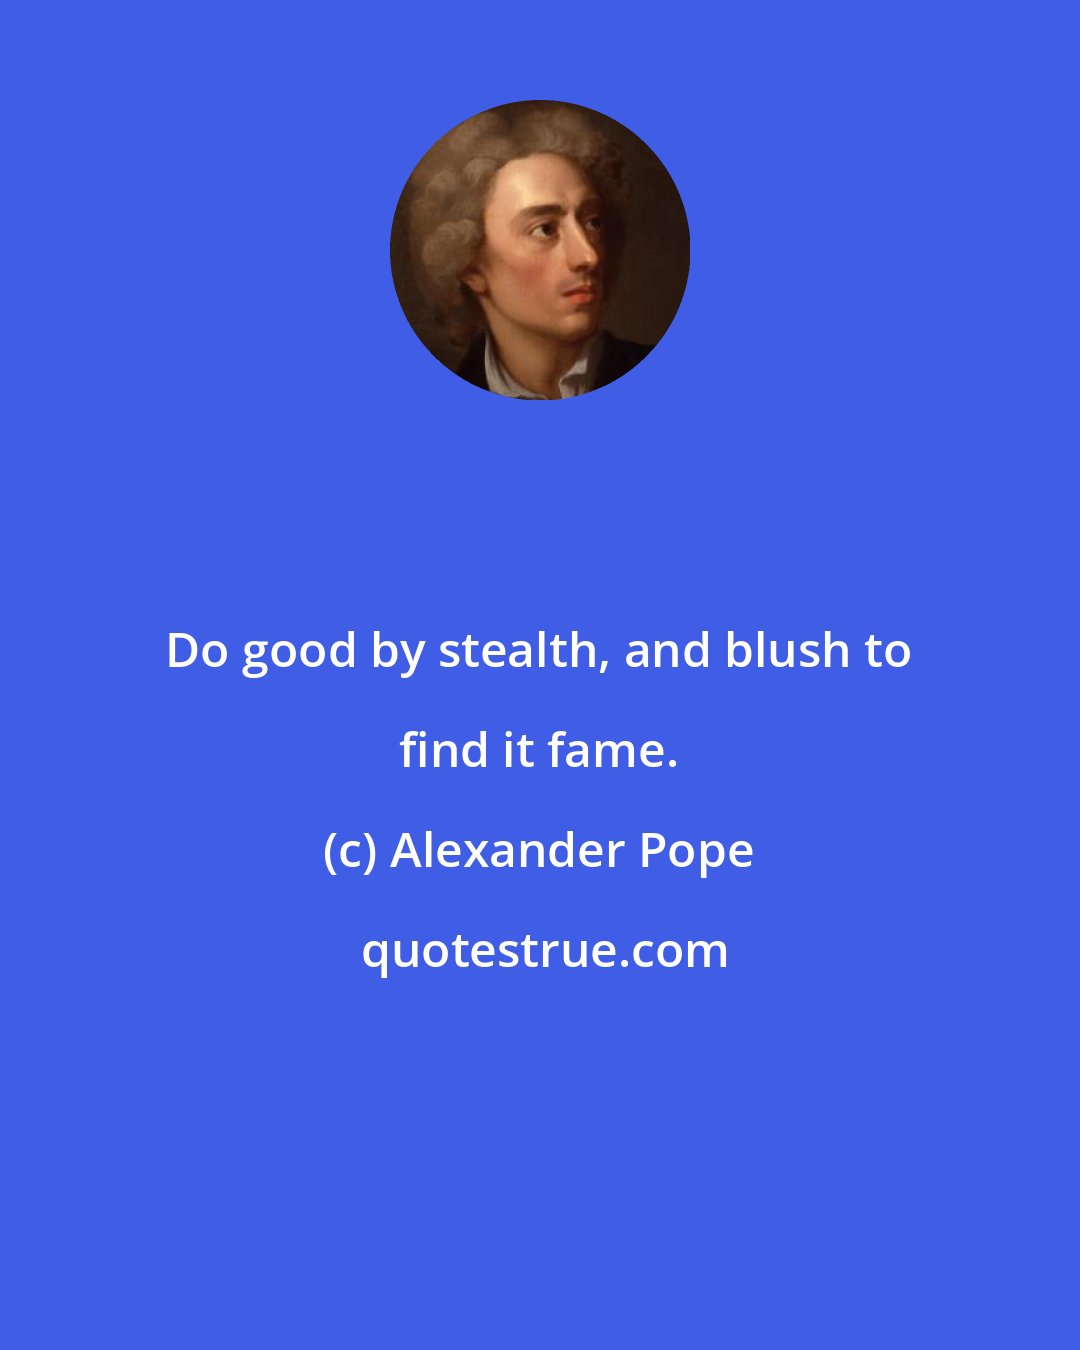 Alexander Pope: Do good by stealth, and blush to find it fame.